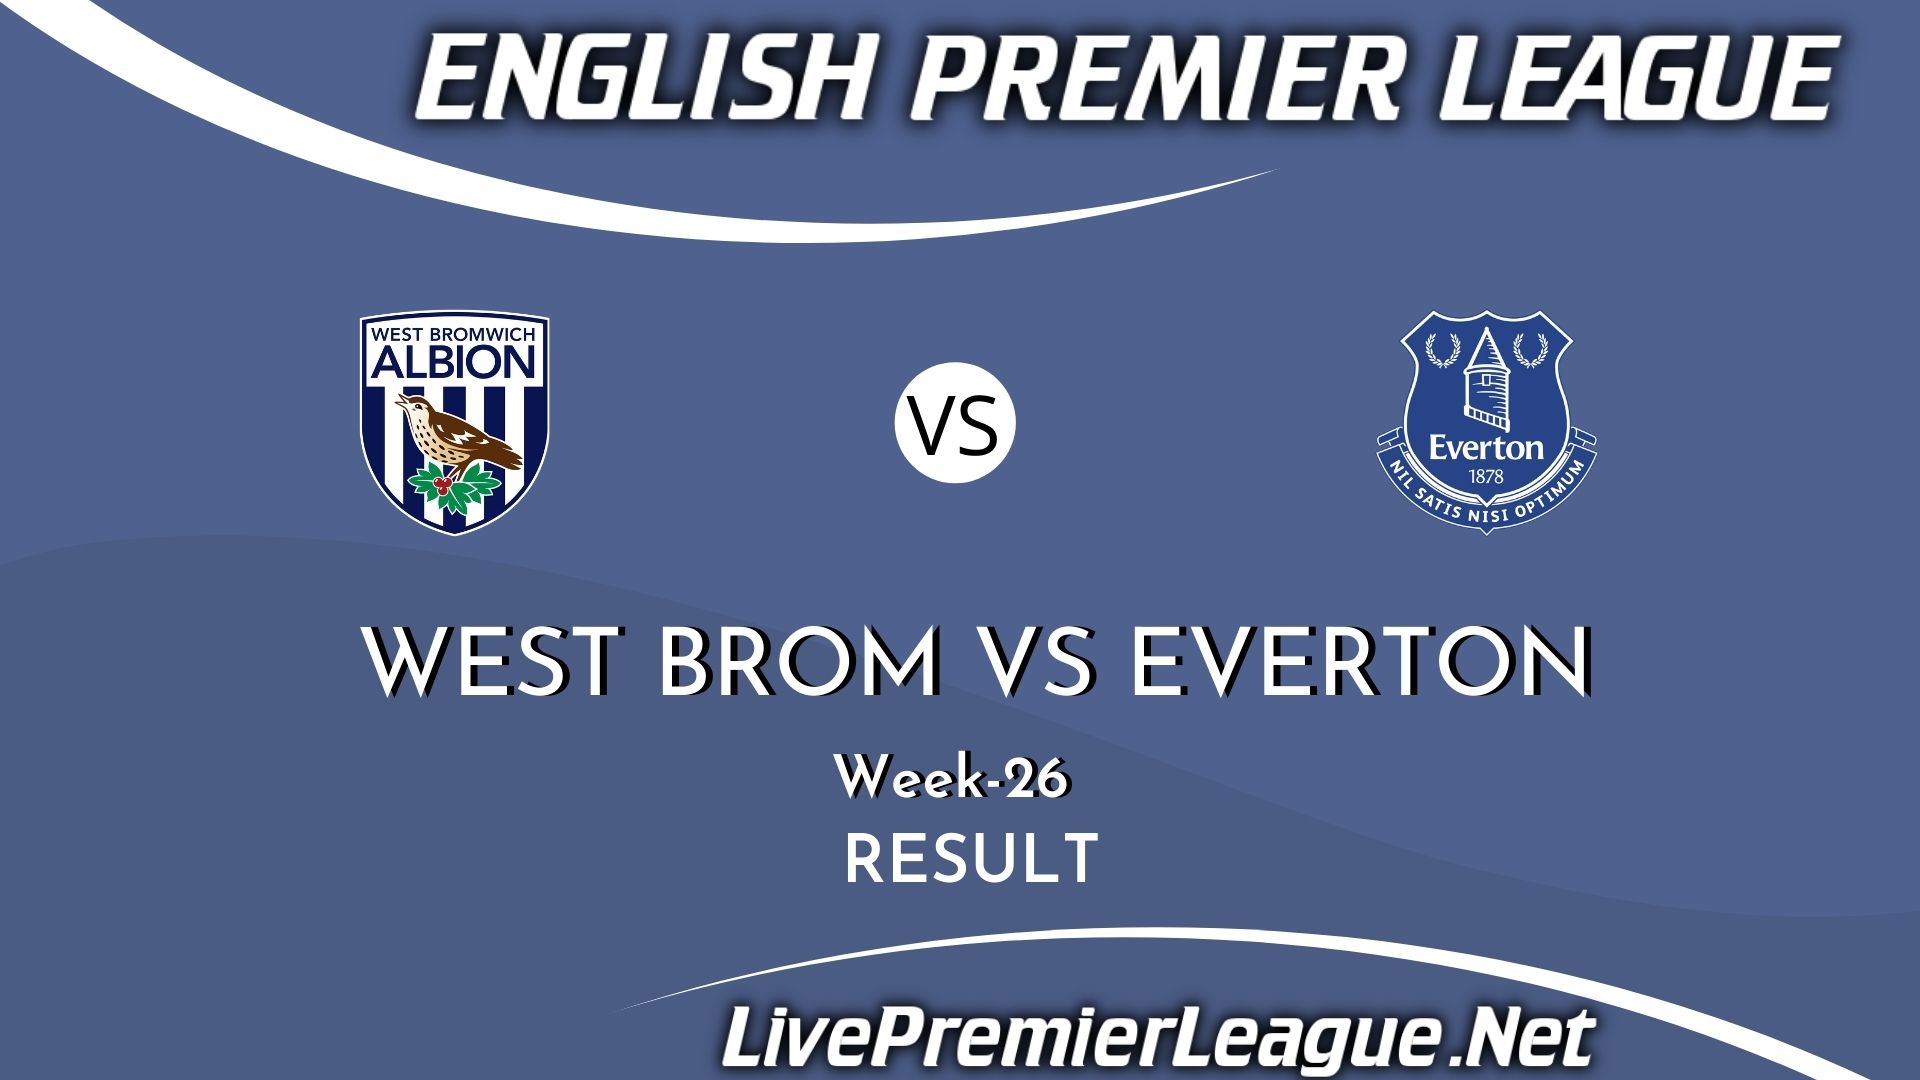 West Bromwich Albion Vs Everton | Result 2021 EPL Week 26